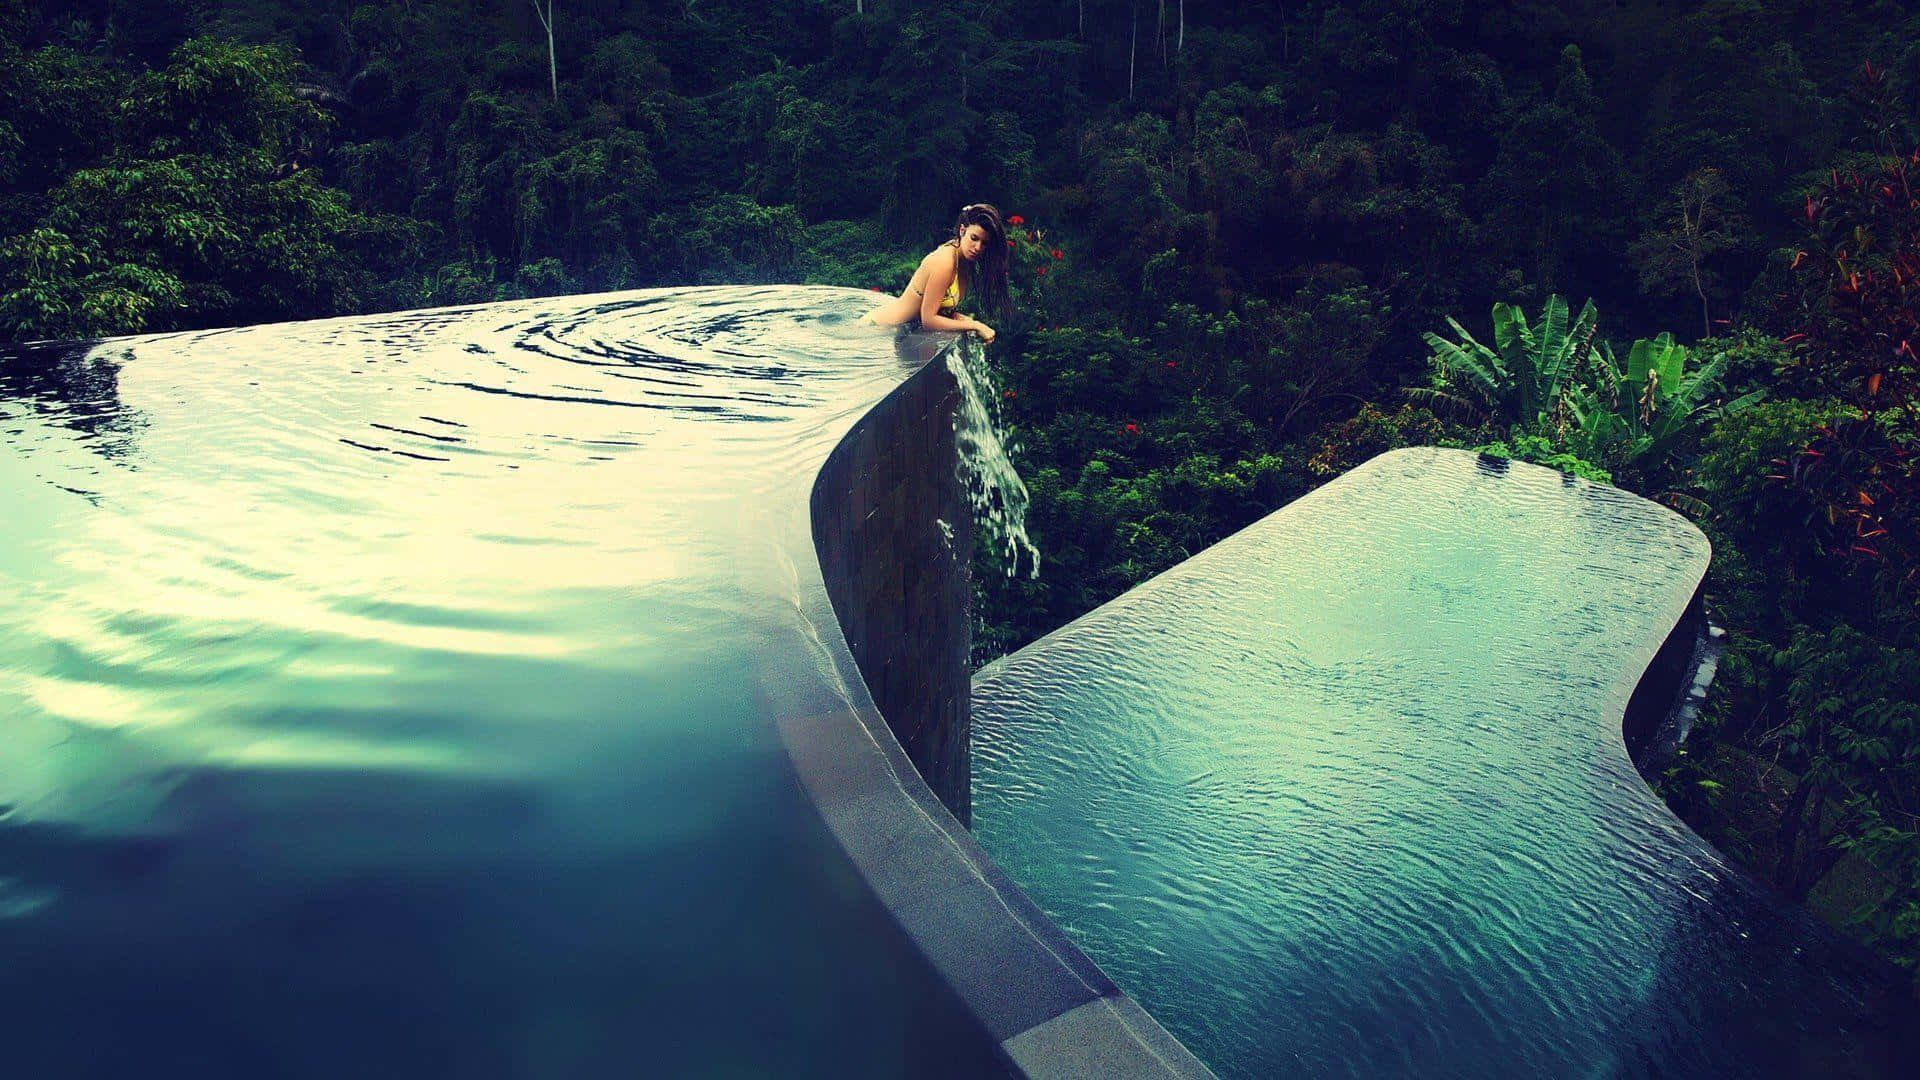 A Woman Is Standing On A Ledge In A Pool